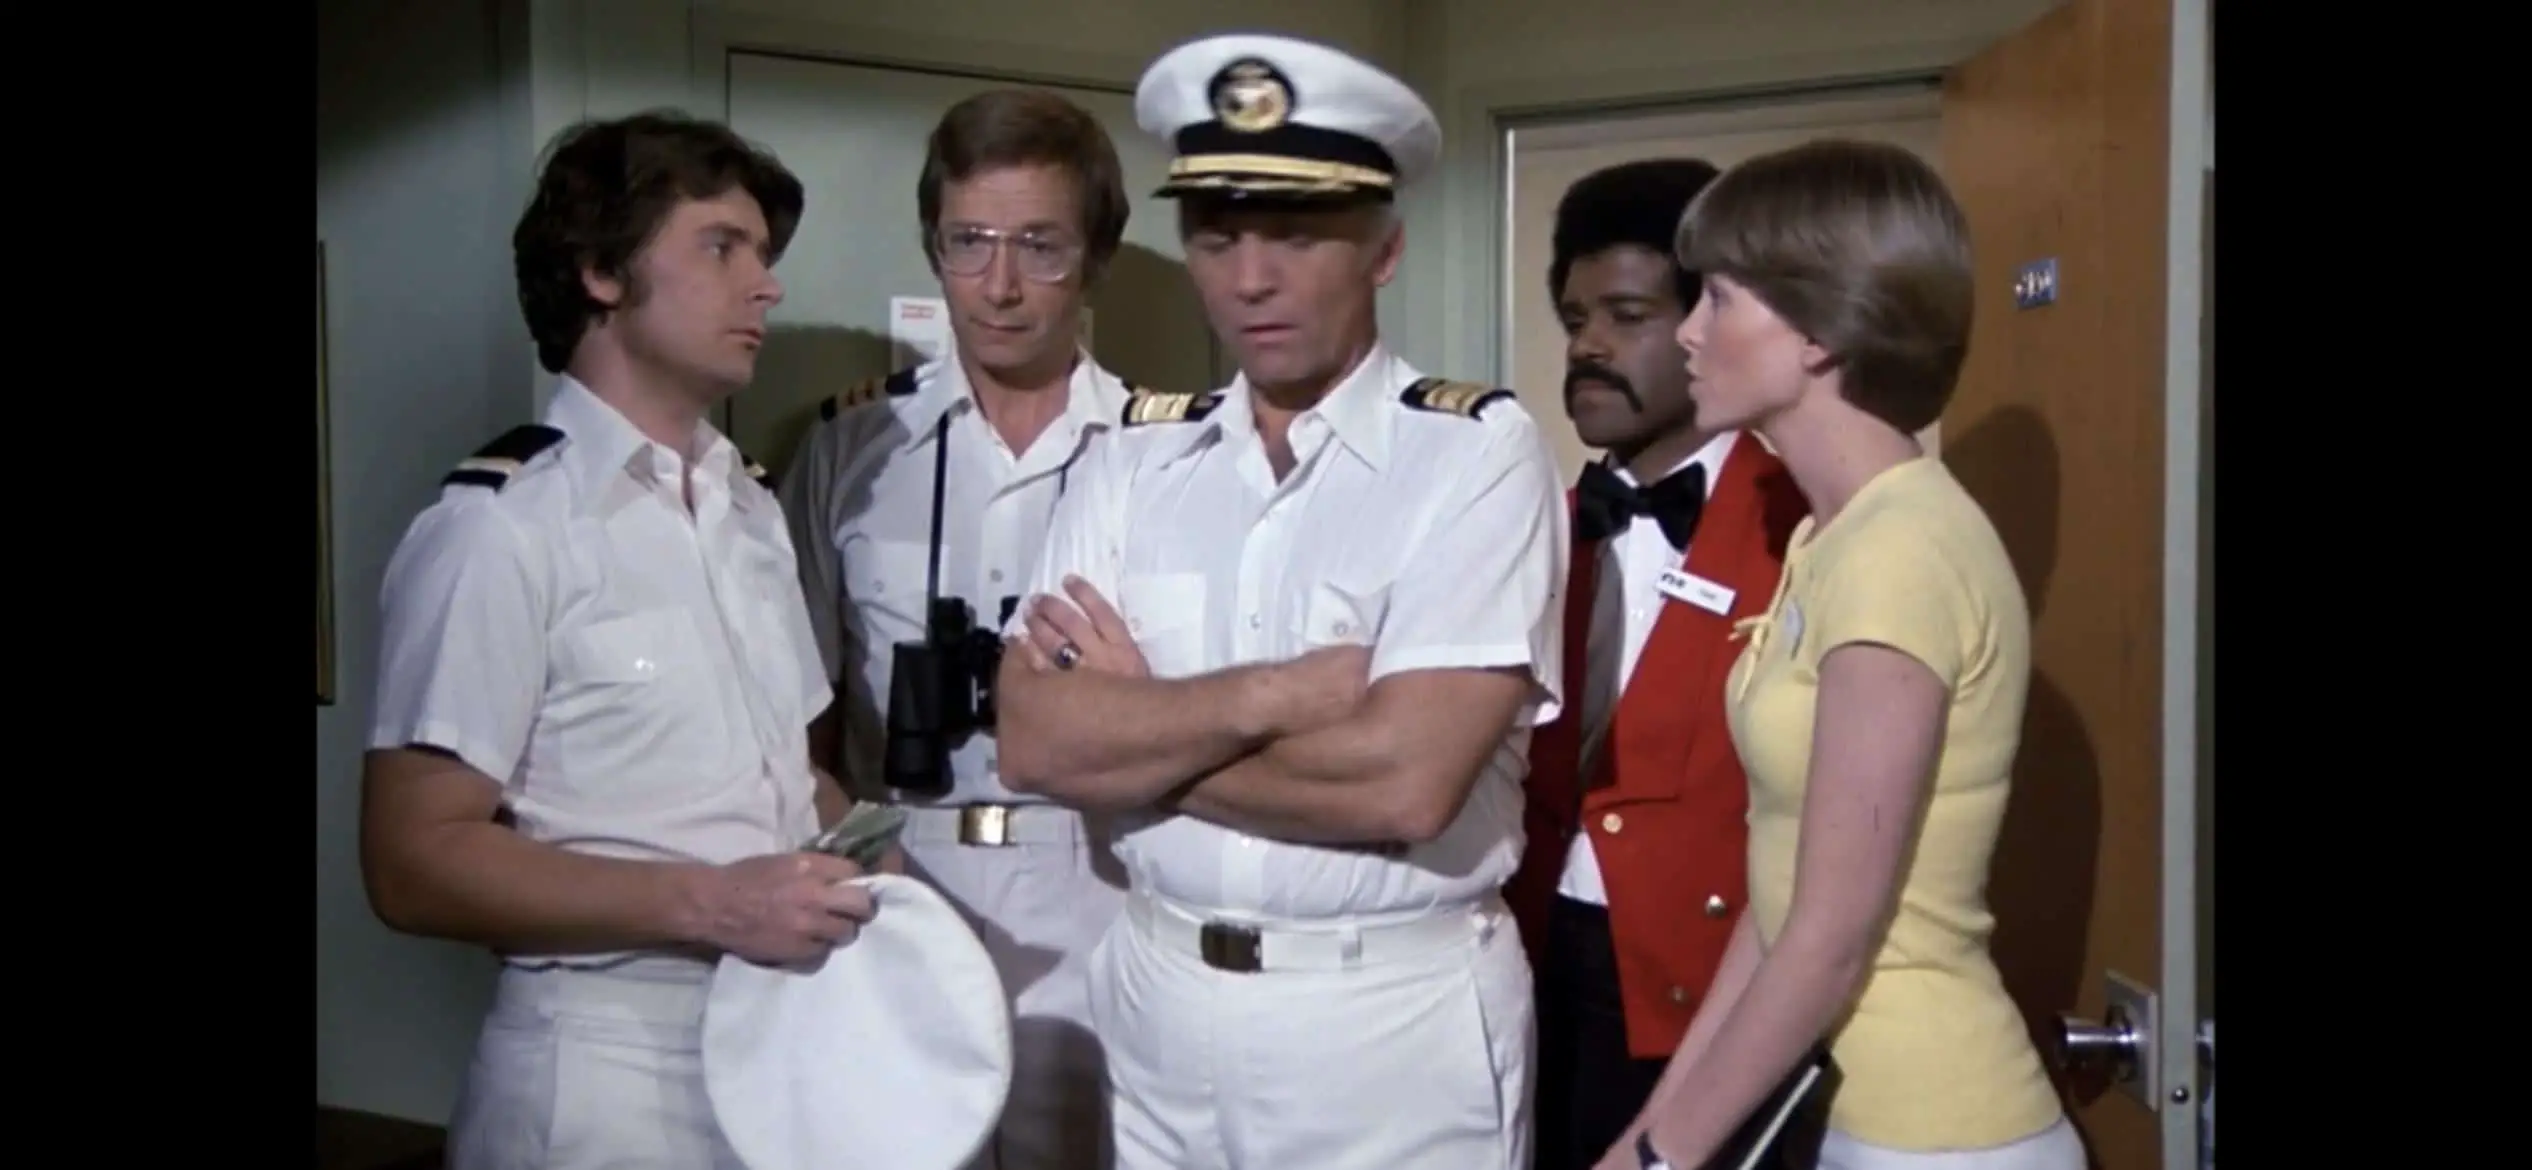 This a photo of the cast of the 1970s and 1980s TV series, "The Love Boat."